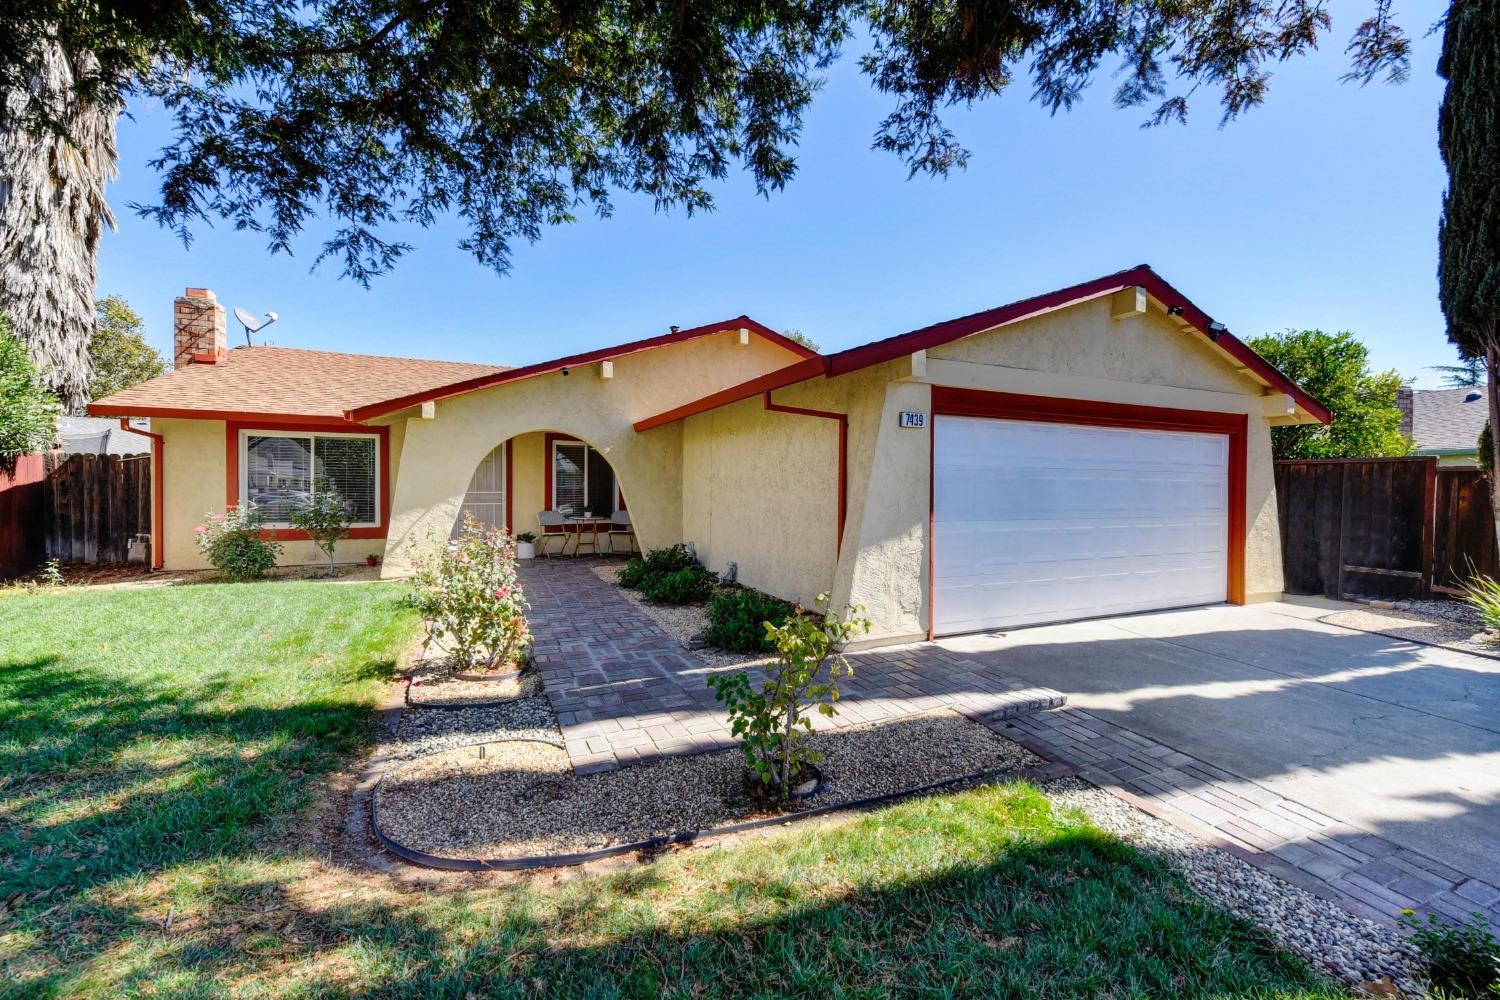 Citrus Heights Darling! Welcome home to this completely refreshed 4 bedroom, 2 bathroom home! Featur